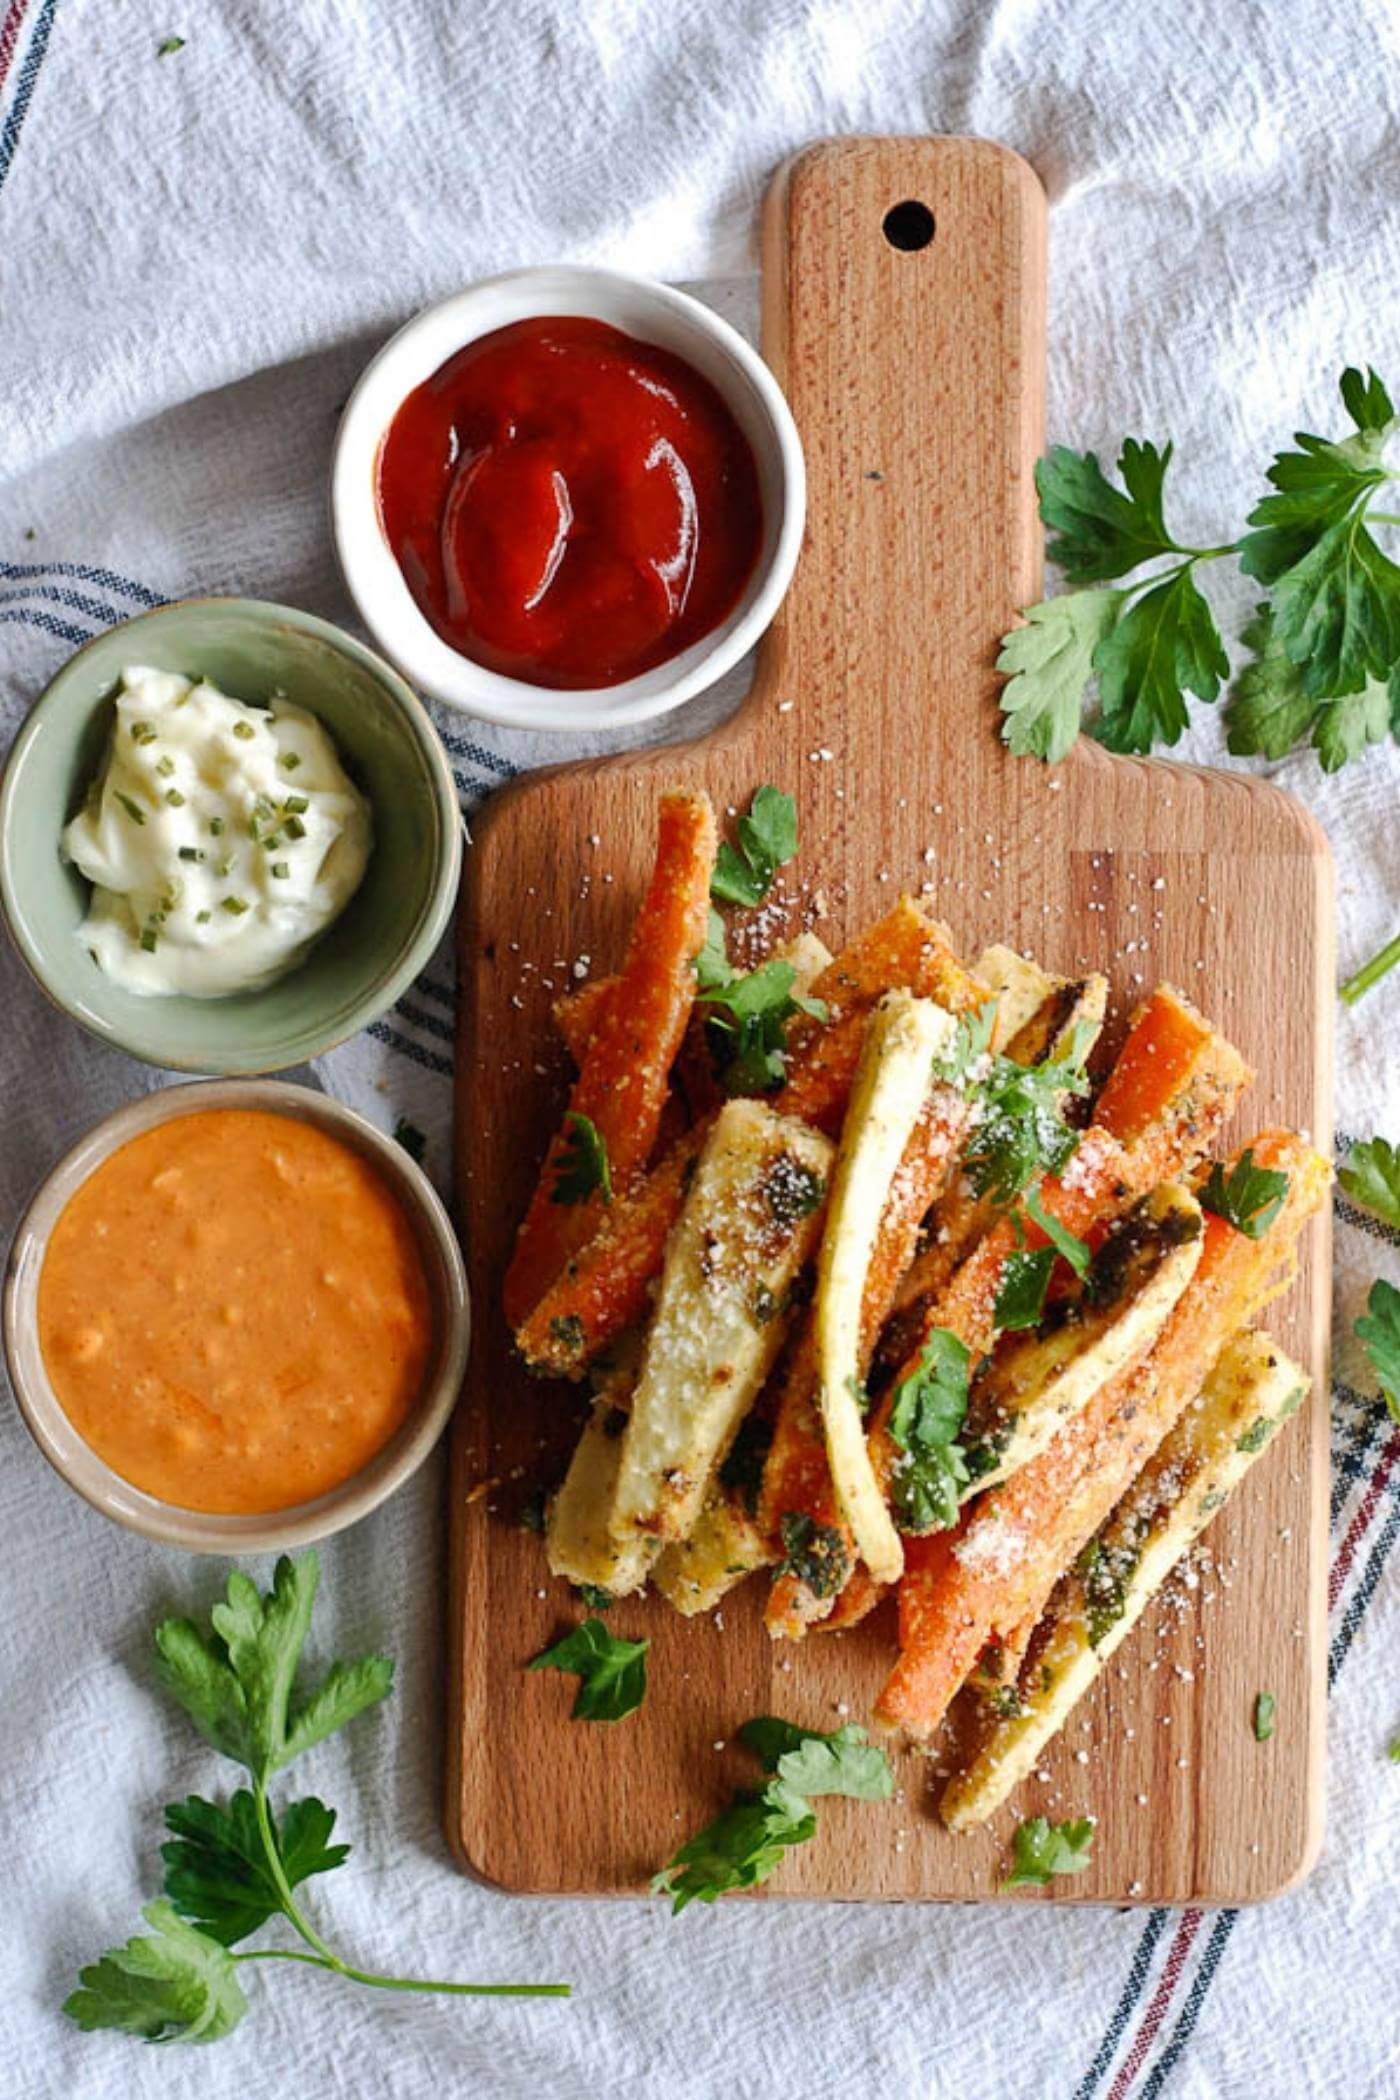 baked parmesan carrot and parsnip fries on cutting board with sauces